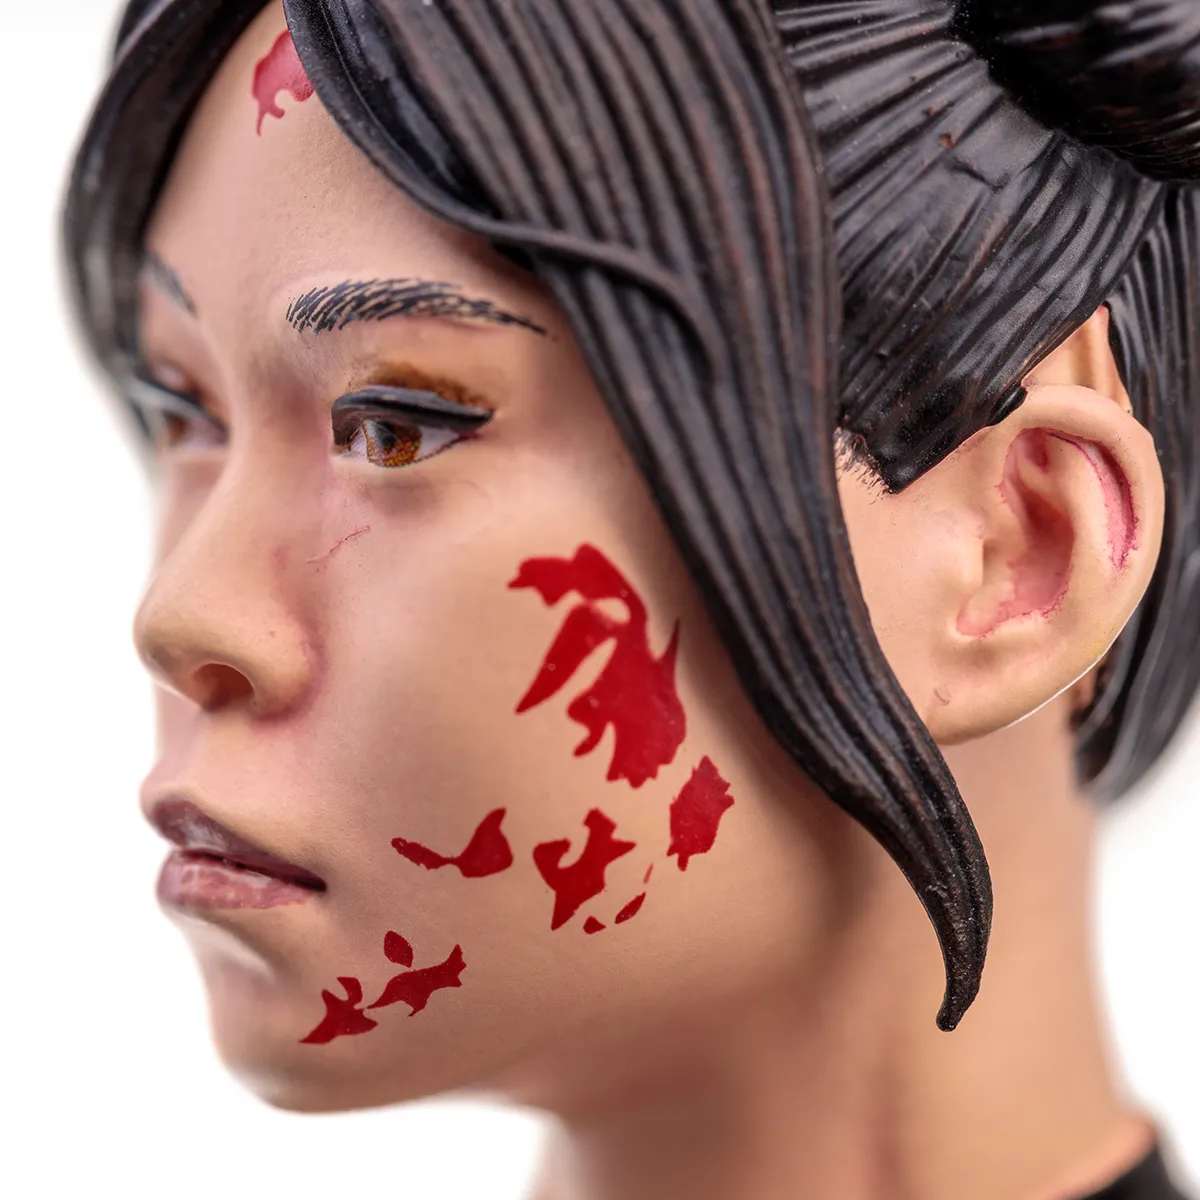 Dead Island 2 Collector's Statue "Amy" Image 8